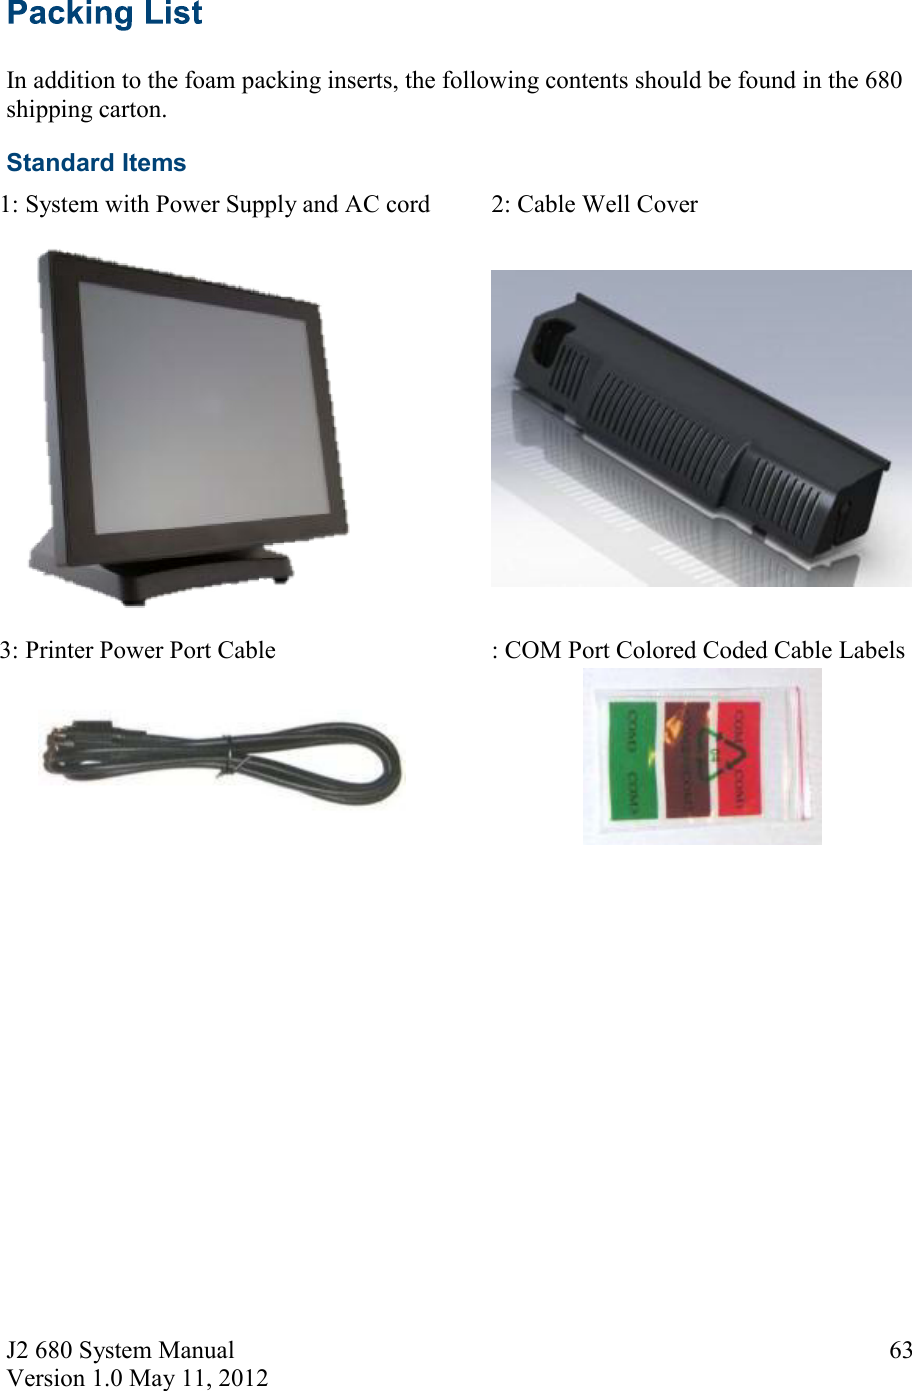 J2 680 System Manual Version 1.0 May 11, 2012     63  In addition to the foam packing inserts, the following contents should be found in the 680 shipping carton. Standard Items 1: System with Power Supply and AC cord    2: Cable Well Cover    3: Printer Power Port Cable    : COM Port Colored Coded Cable Labels     